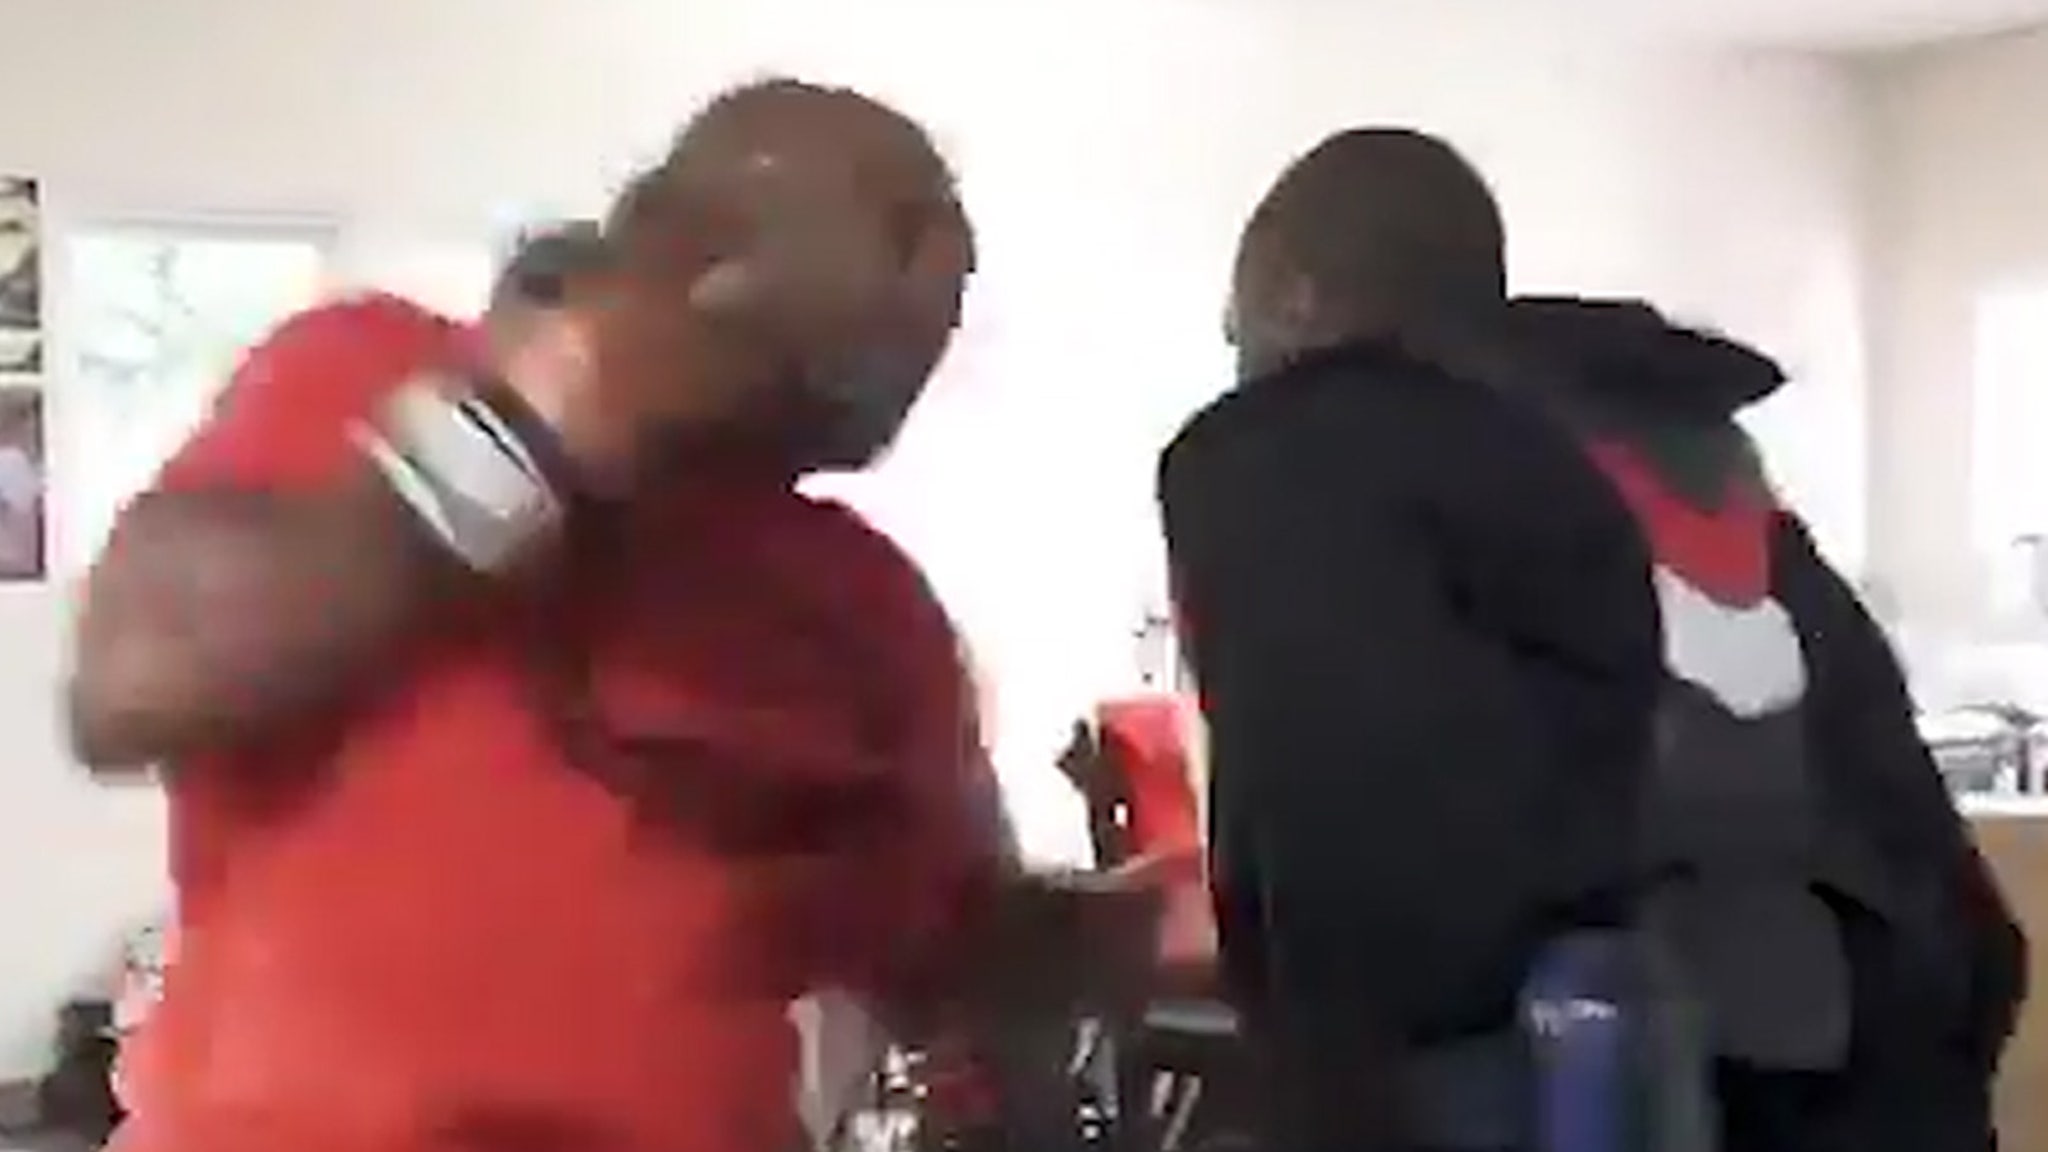 Mike Tyson Back in Boxing Gym, Terrorizes Mitts In Scary Workout Sesh